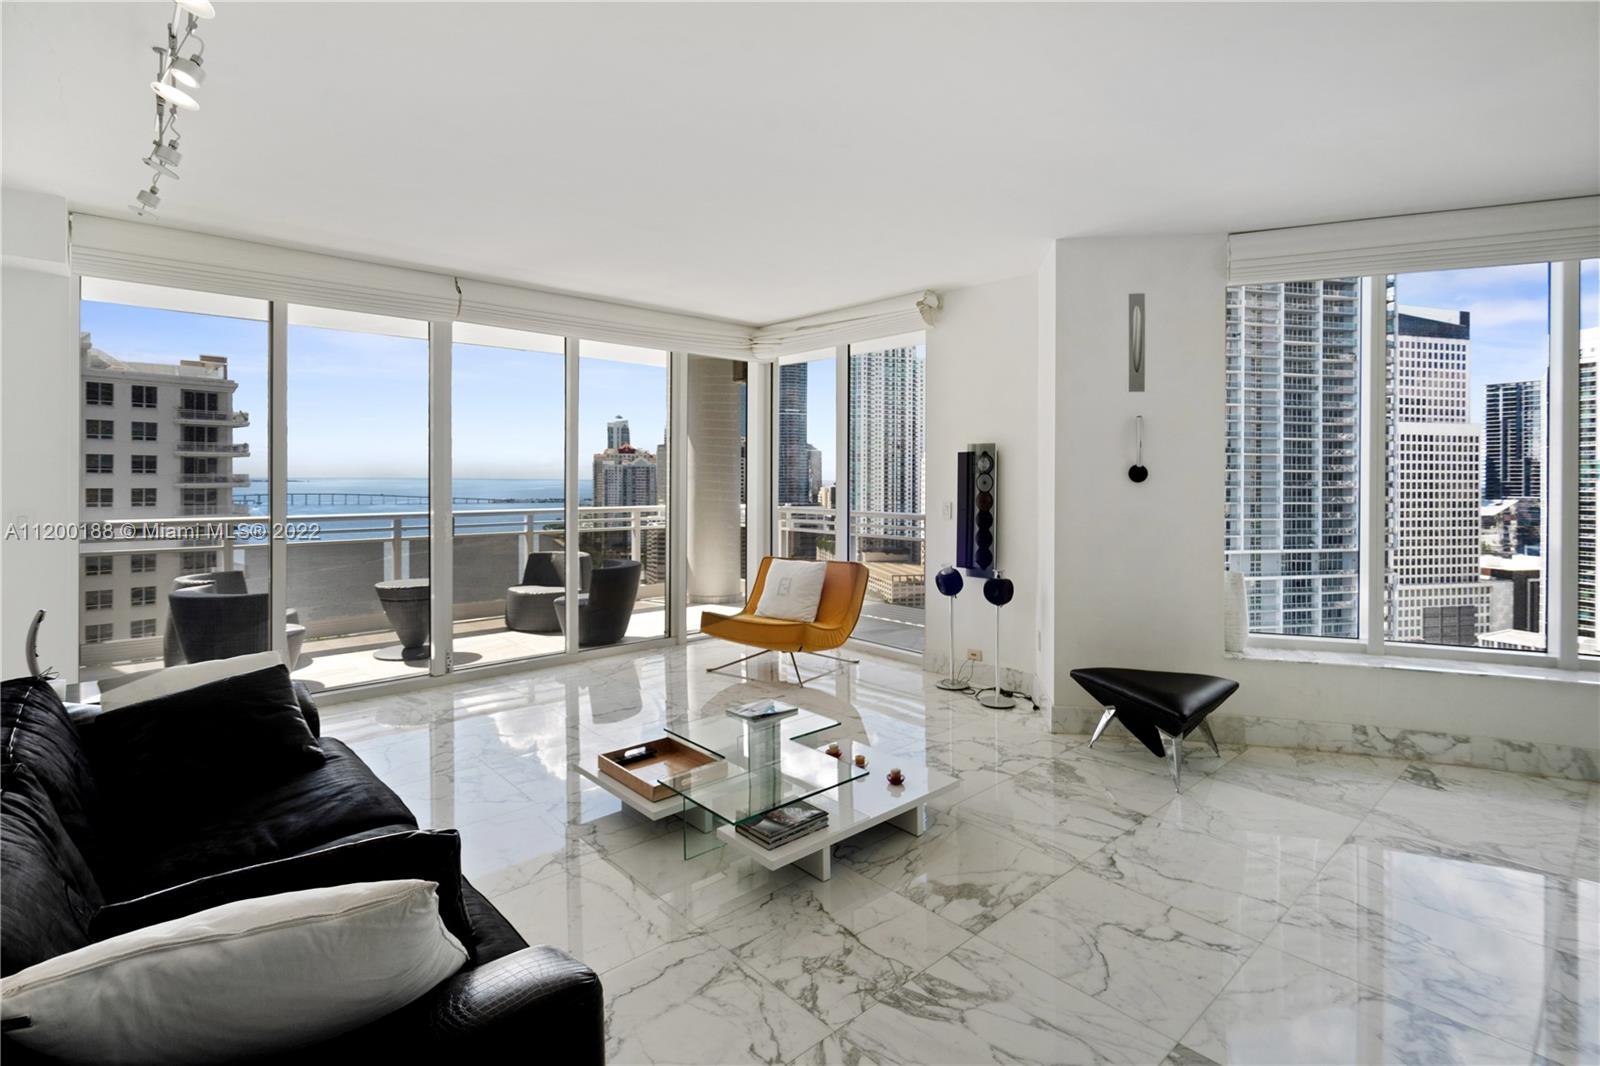 The most desirable 04 line at the prestigious Carbonell at Brickell Key. Corner 3 Bd/3.5 Ba, 270 degree views of the city, river, port and bay. Largest floorplan in the building with 2,591 SF and a south and a north terraces Best Building on Brickell Key, well managed with 5 start feel to it; offers ull service concierge and great amenities : heated pool with bay views, 2 tennis courts, fitness center, squash and valet.